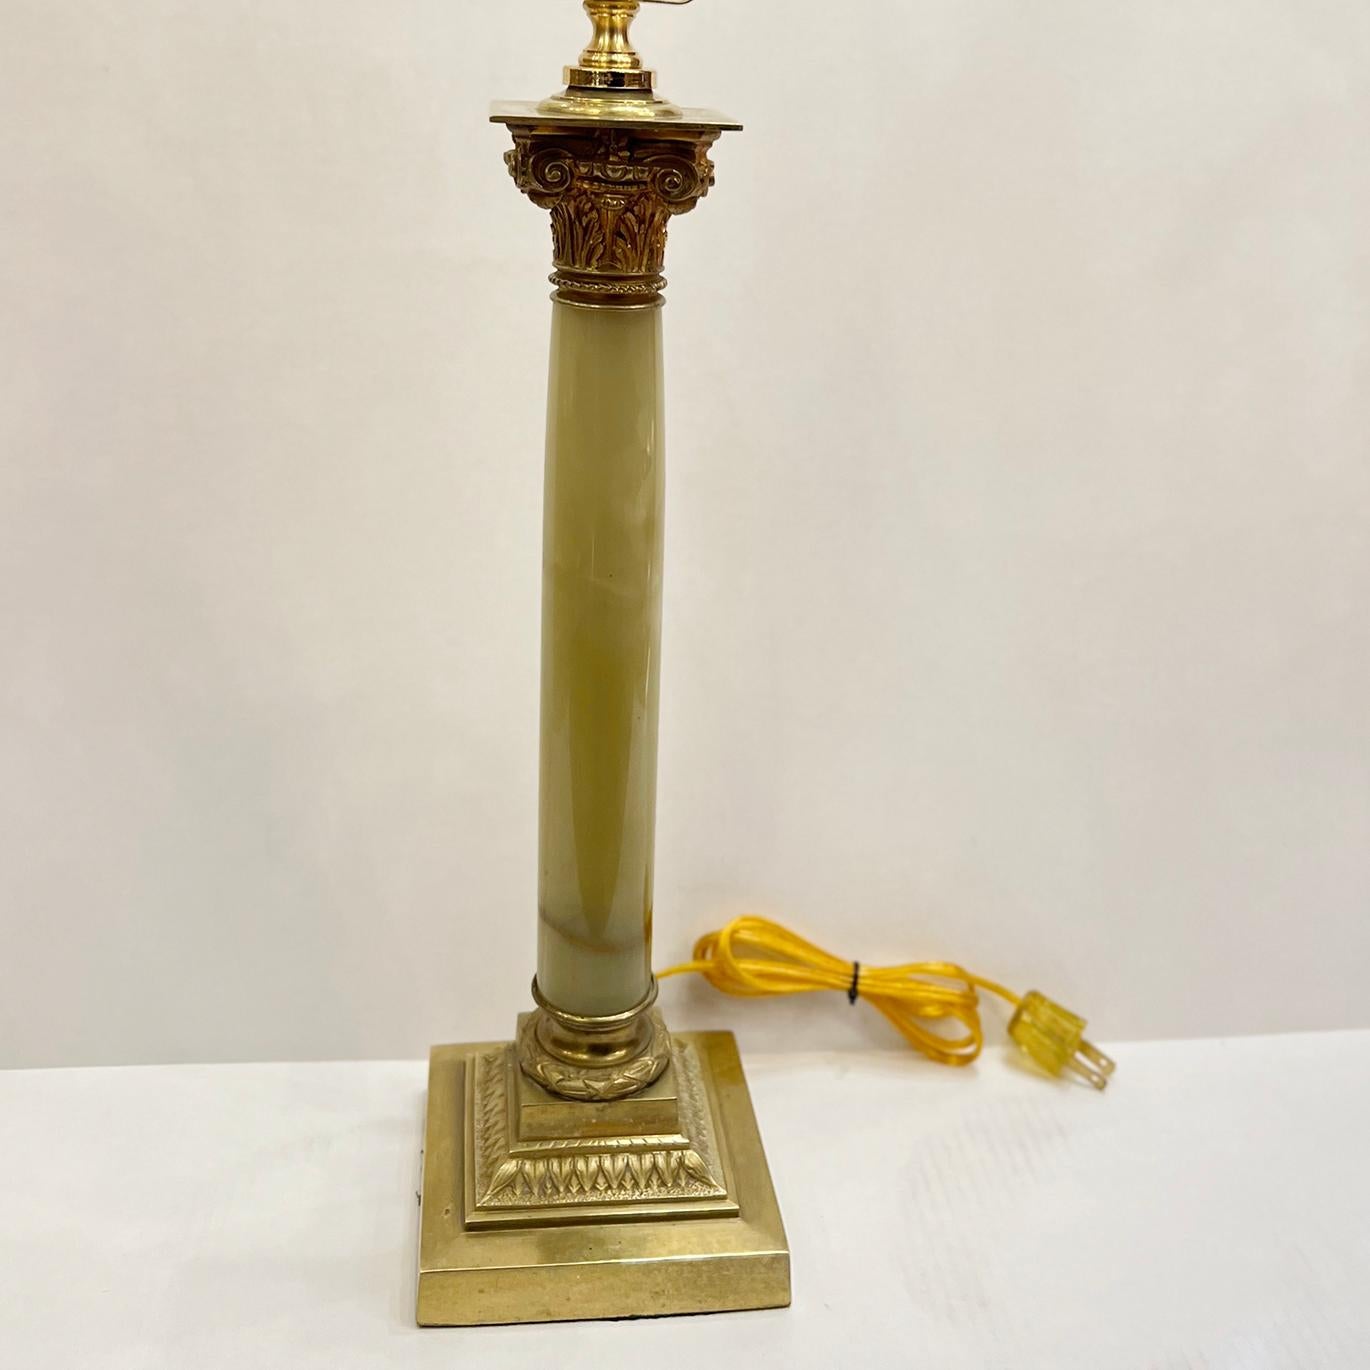 A single circa 1920's neoclassic onyx and gilt bronze table lamp.

Measurements:
Height of body: 17.25